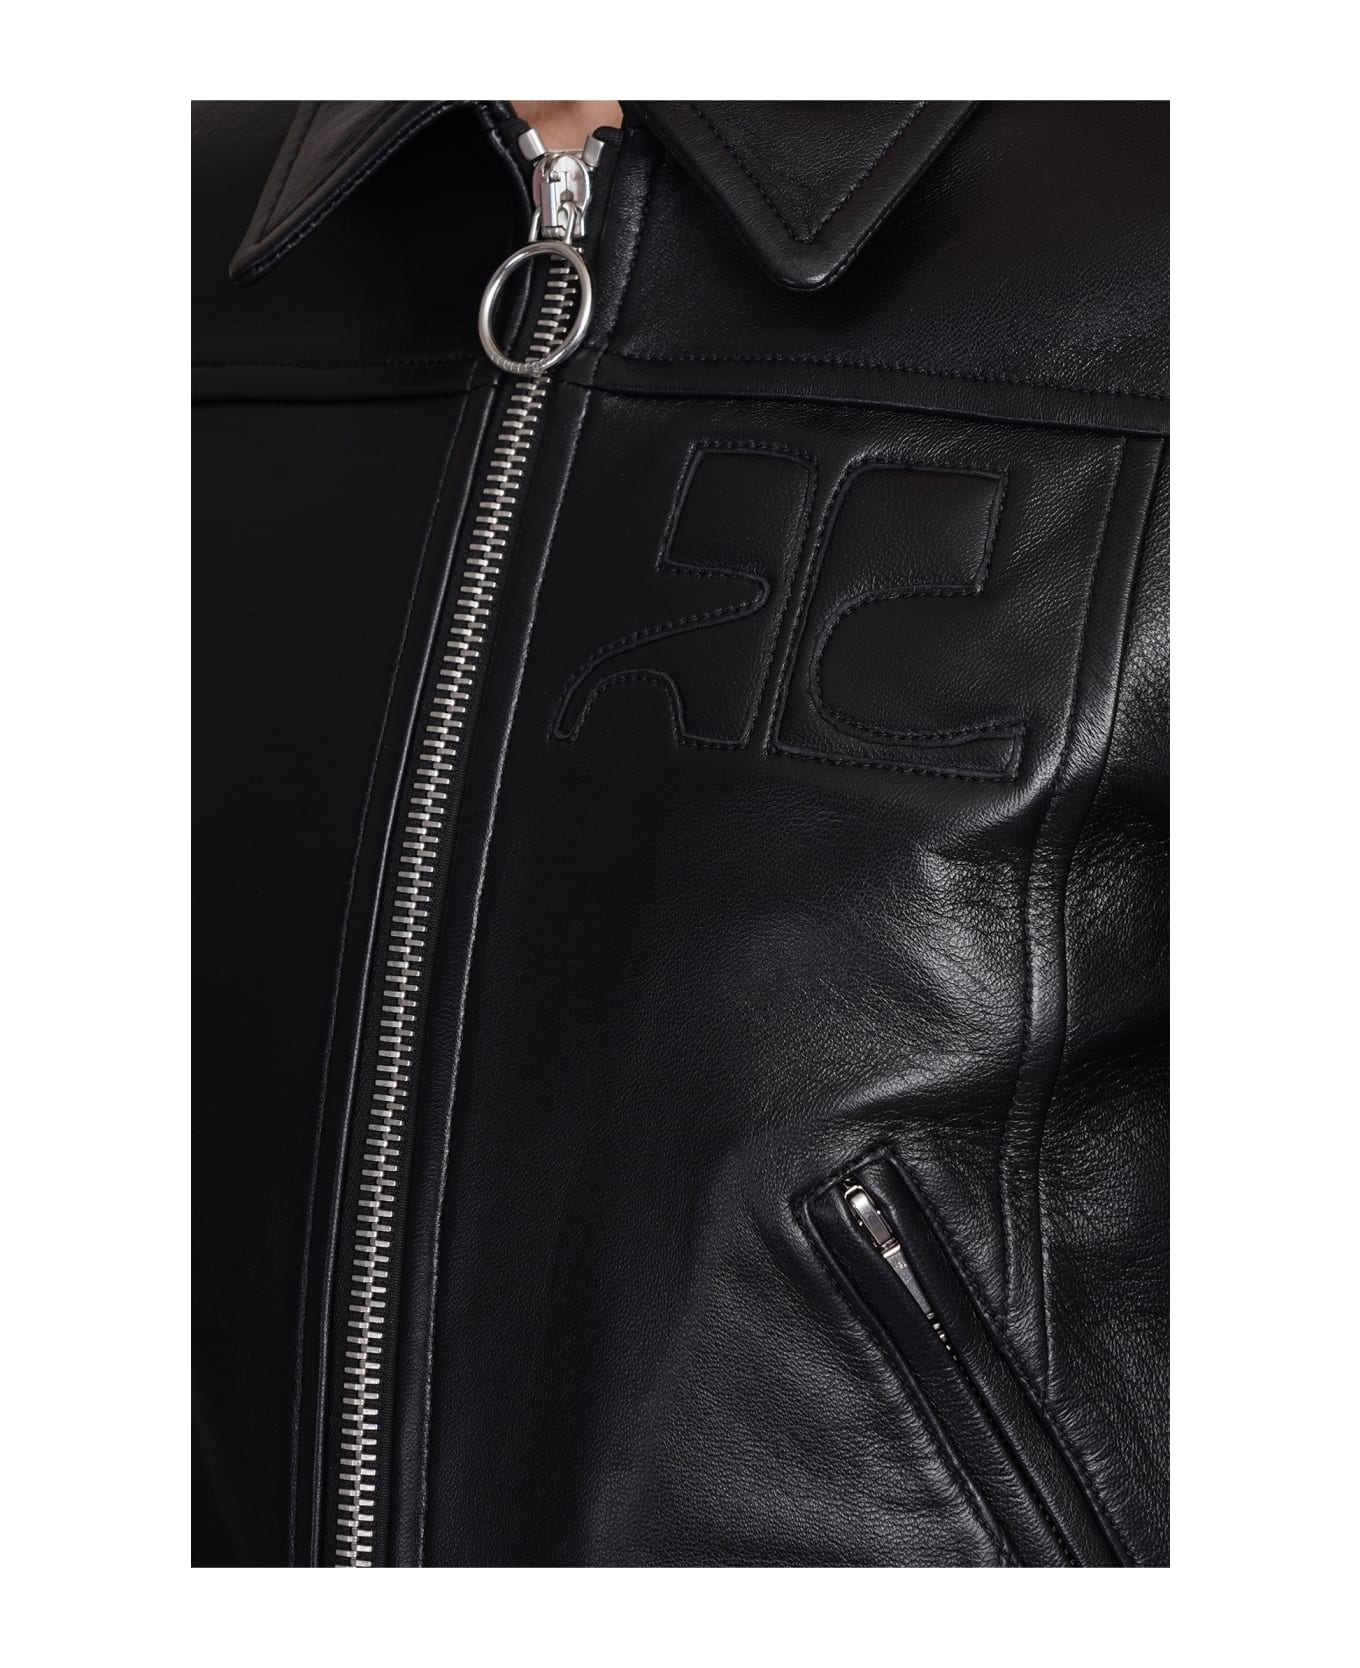 Courrèges Leather Jacket In Black Leather - black レザージャケット